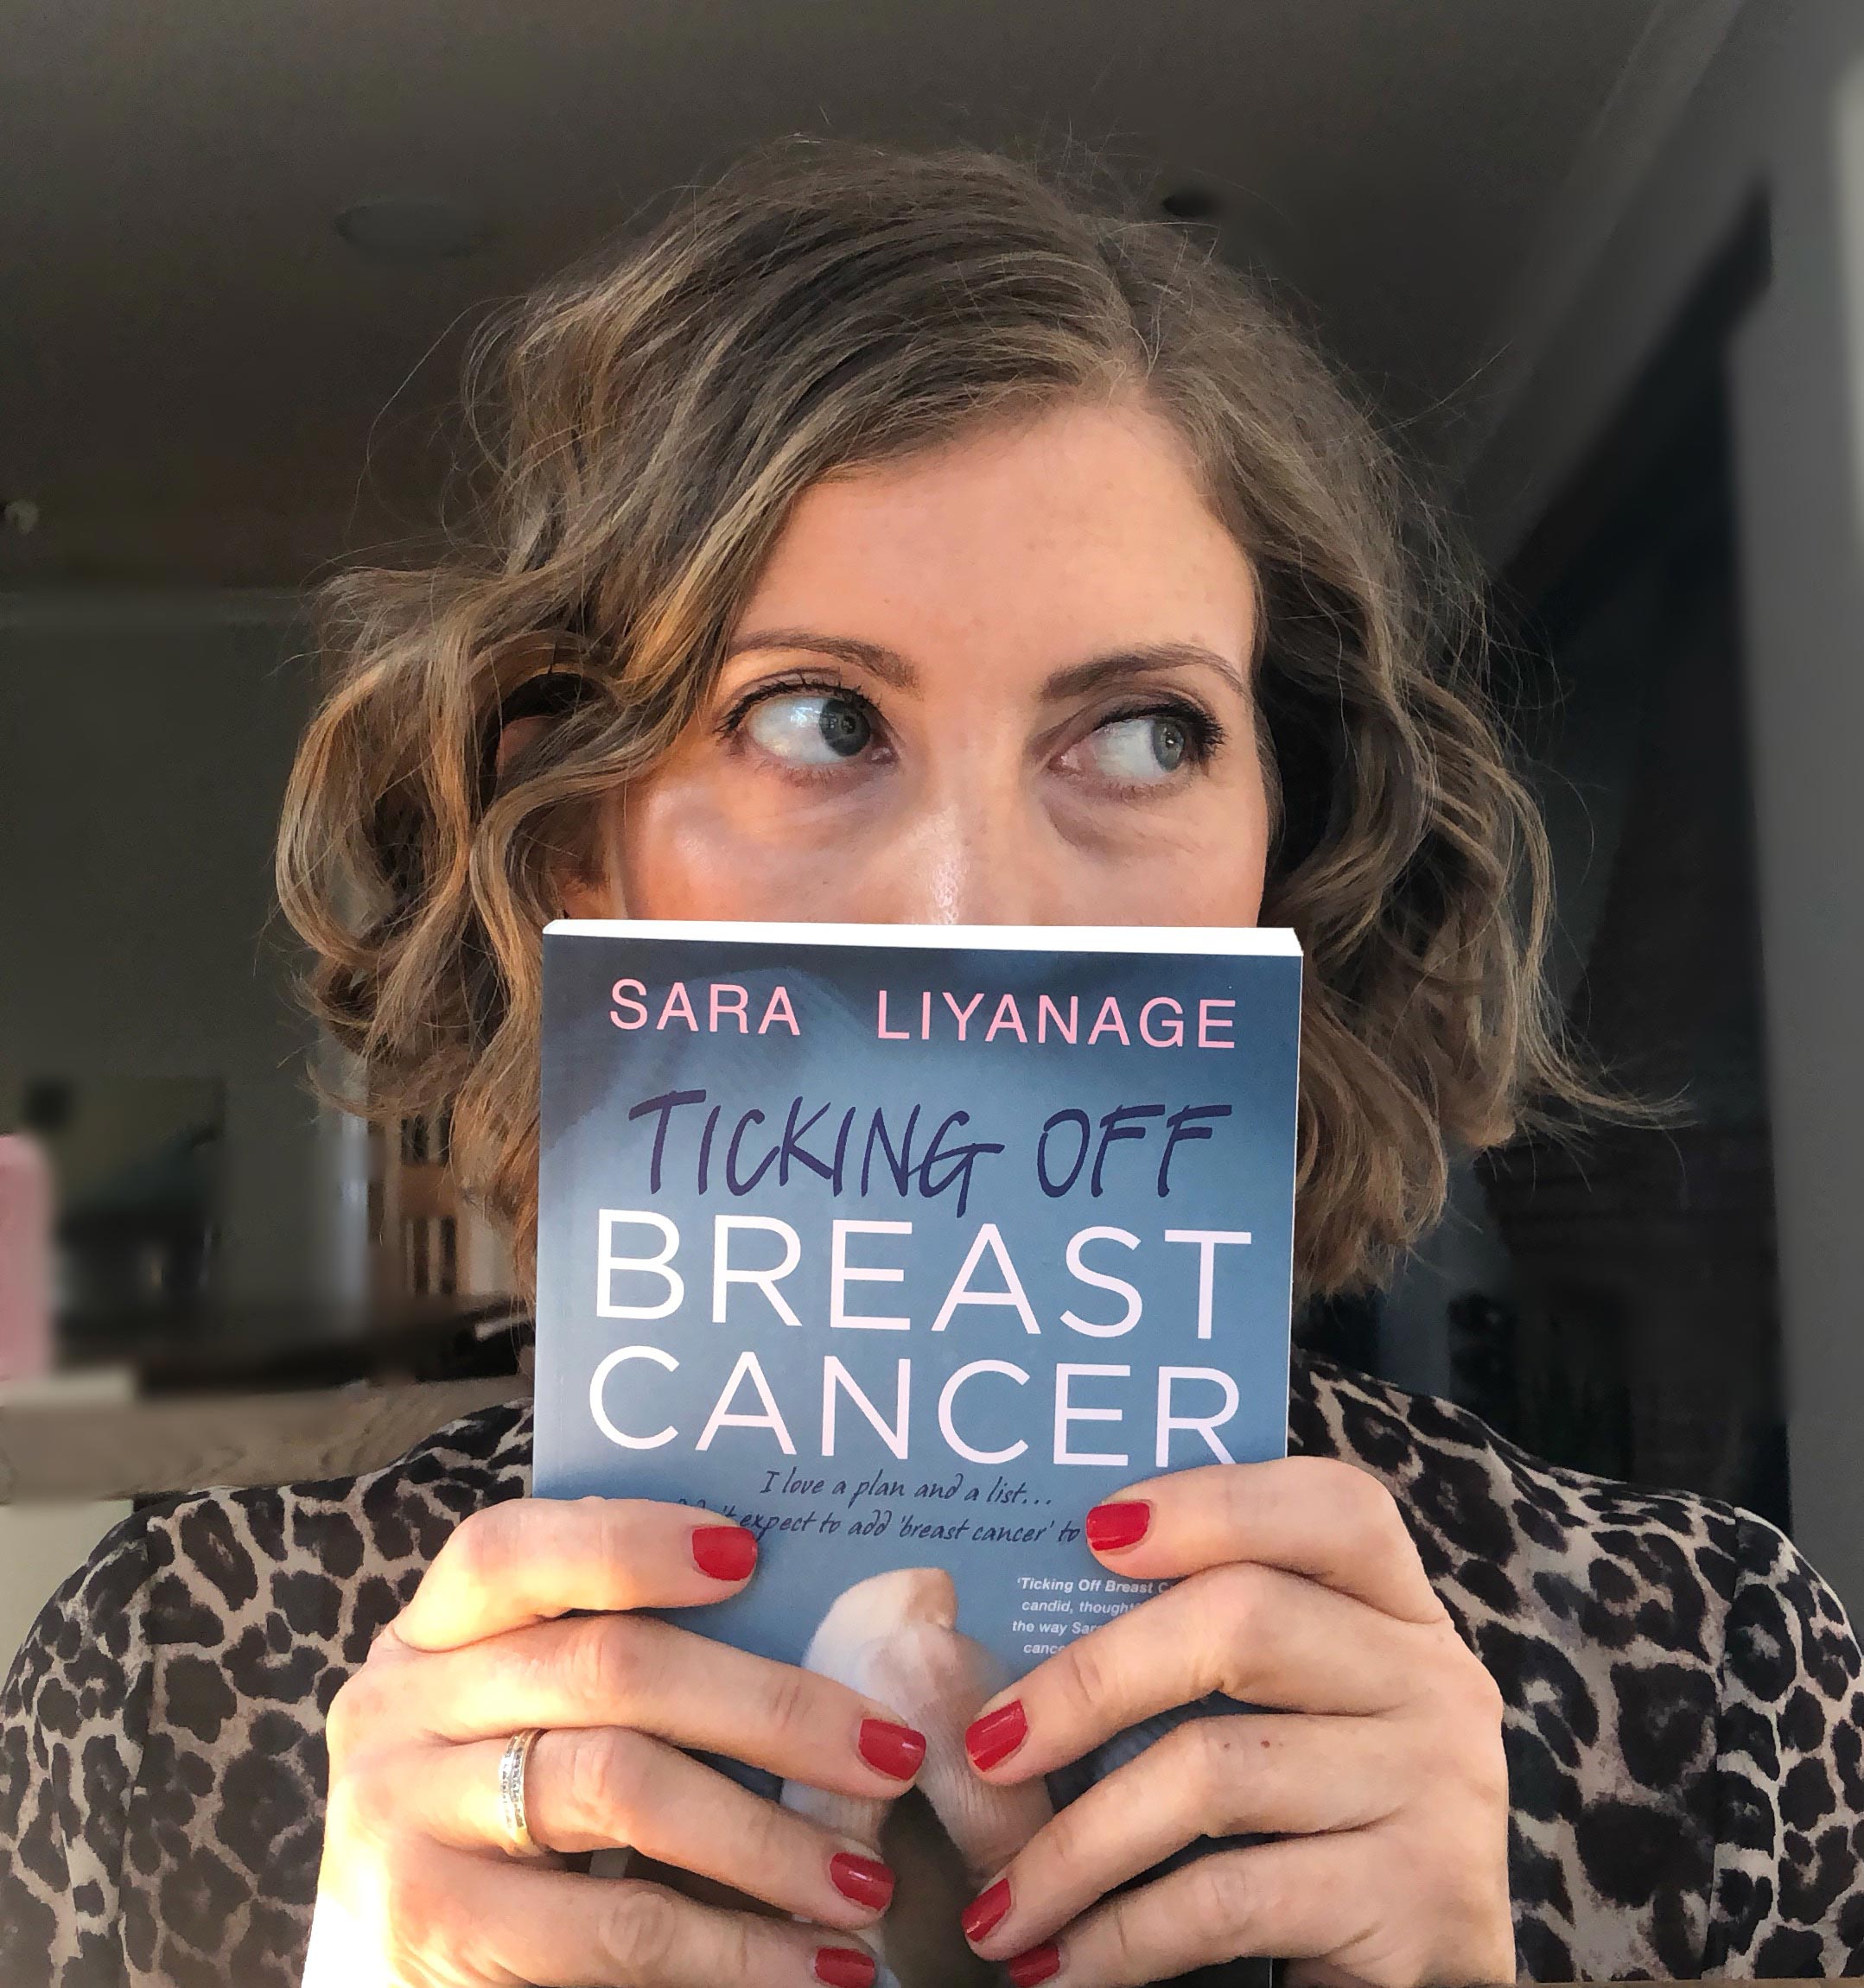 Sara's breast cancer journey in line for book award